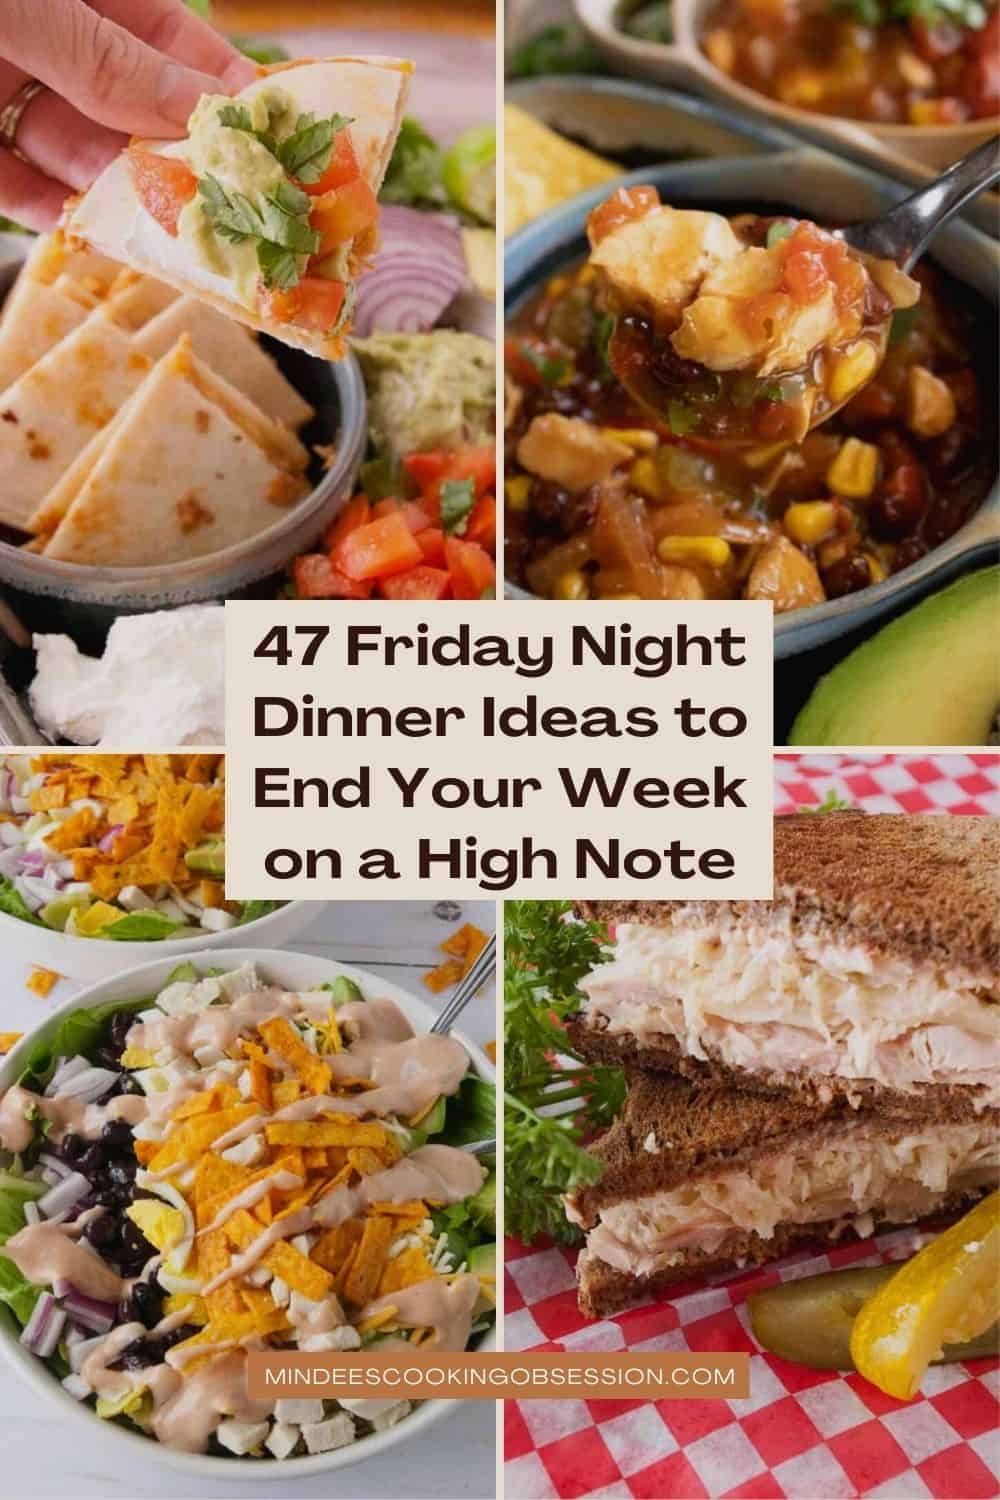 47 Friday Night Dinner Ideas to End Your Week on a High Note - Mindee's ...